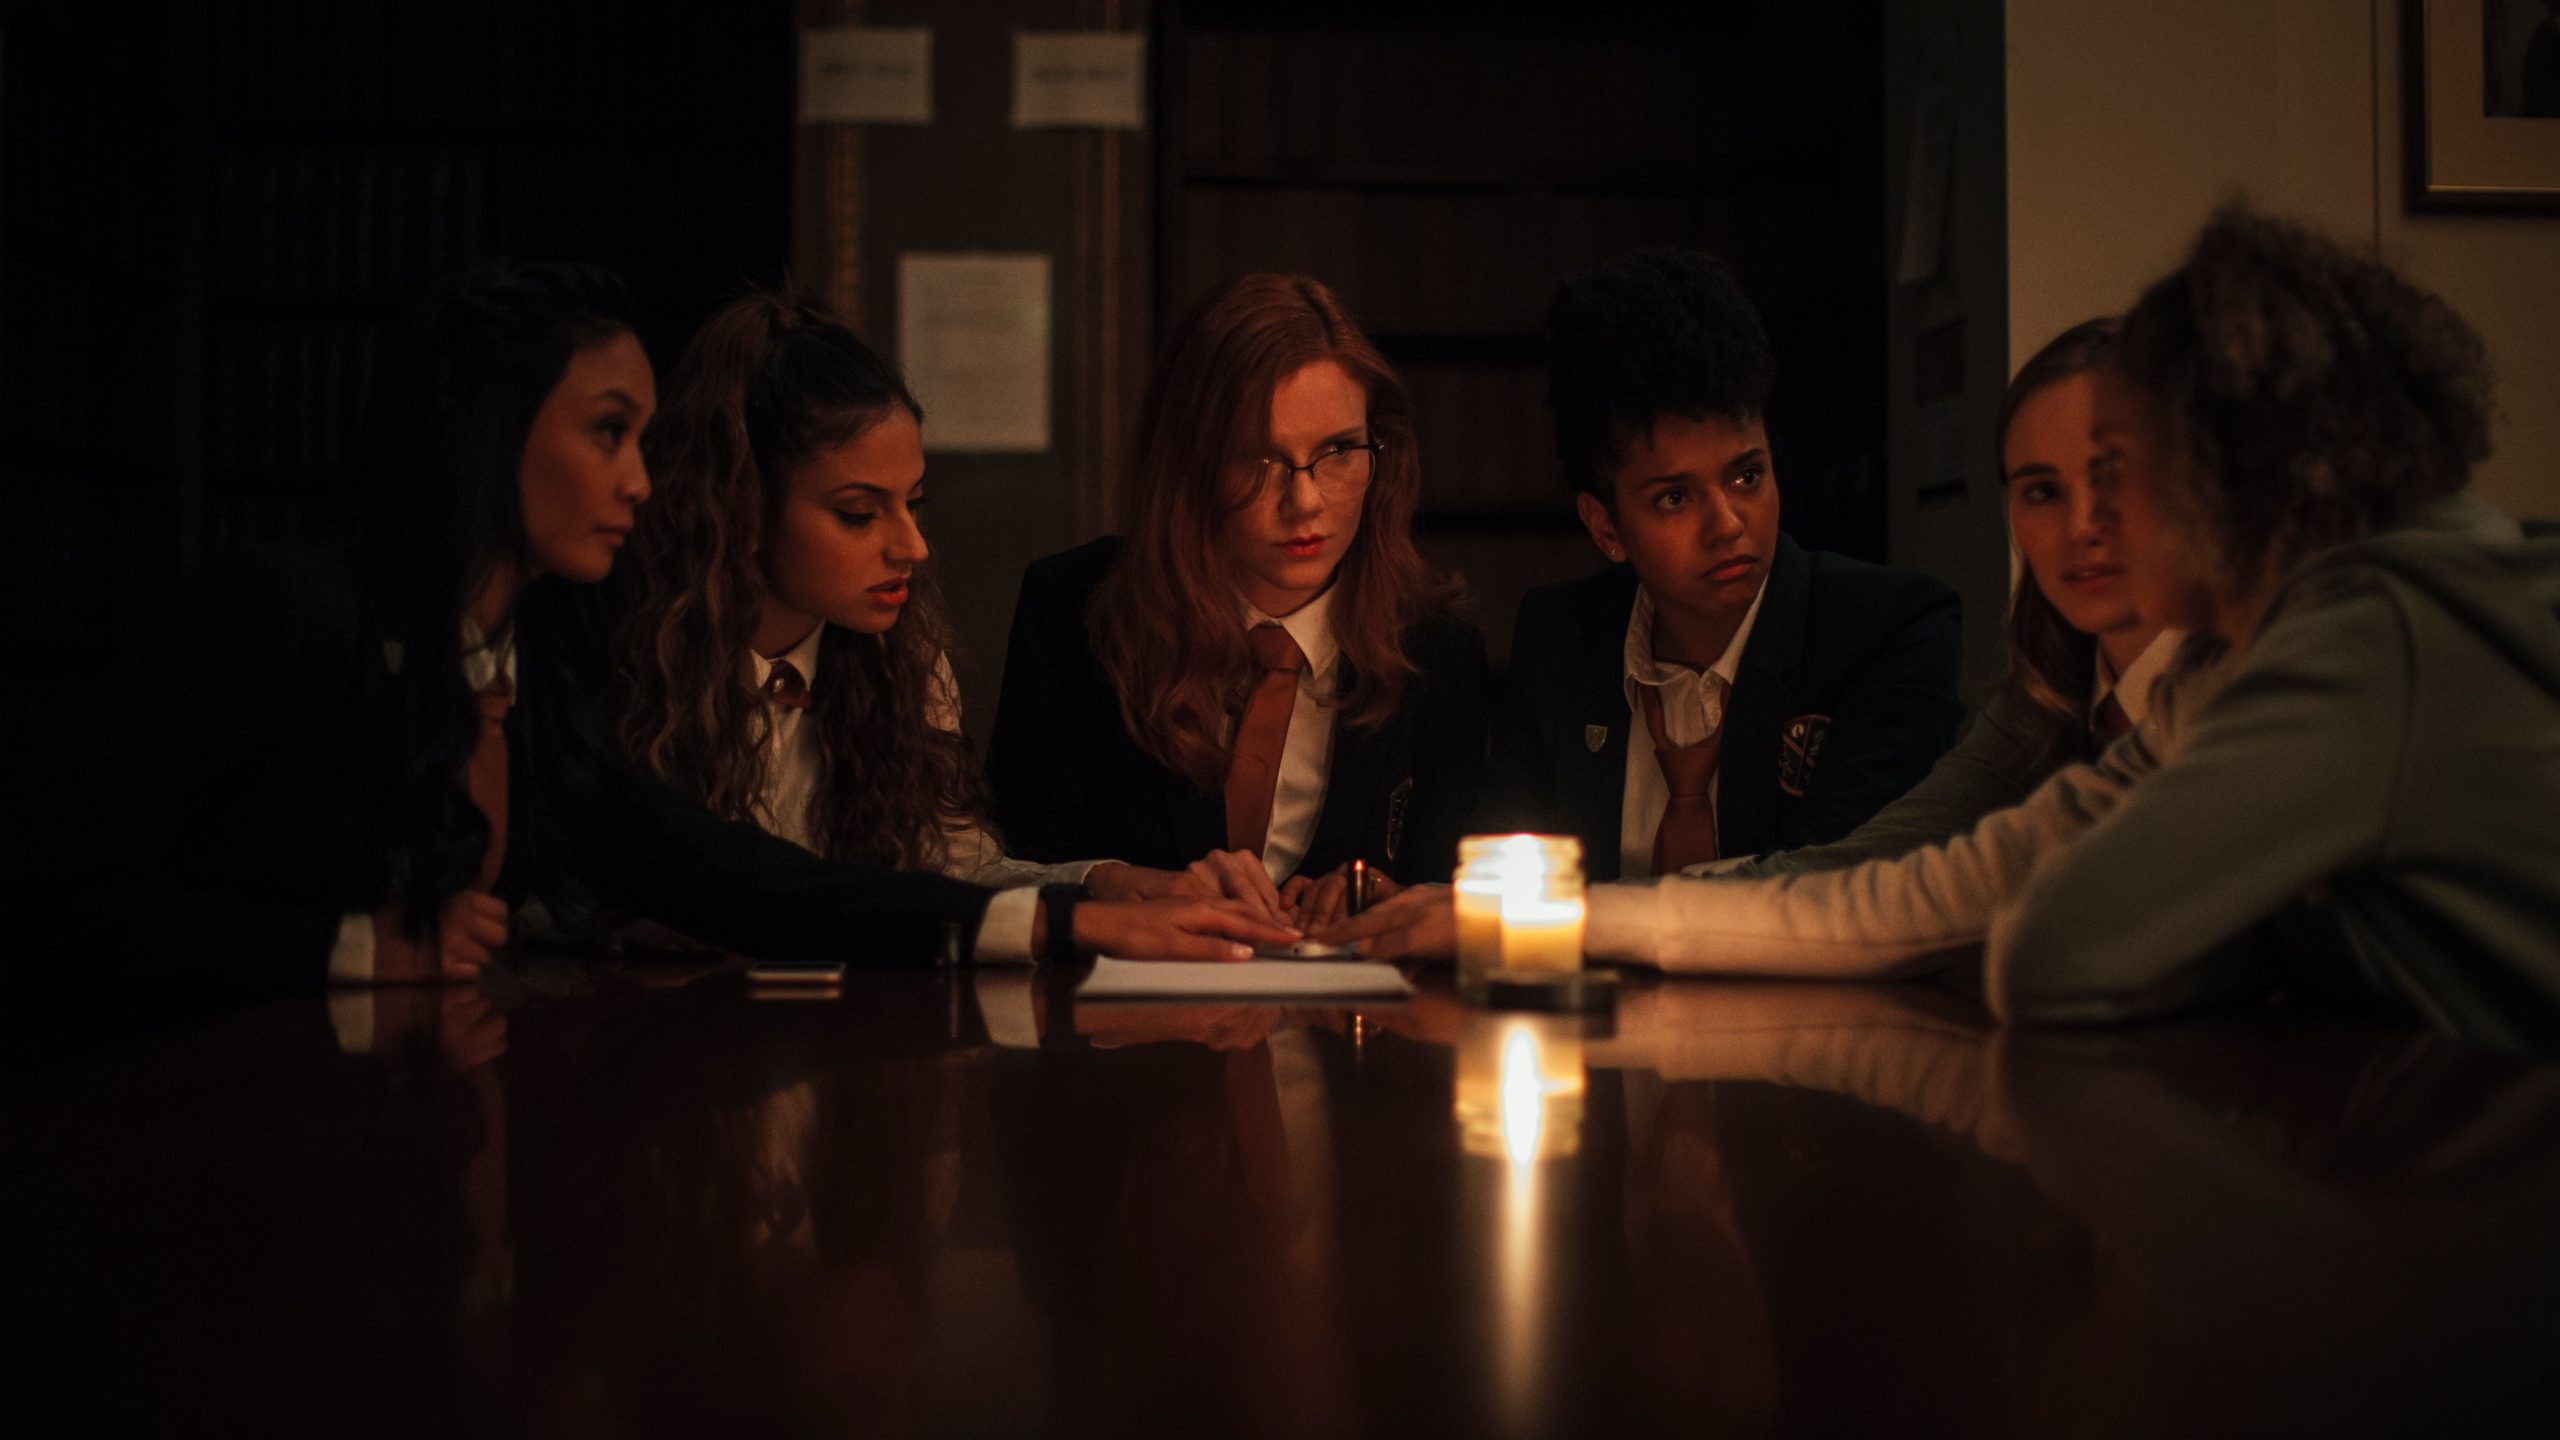 The girls reach out into the spirit realm. (Image: RJLE Films/Shudder)